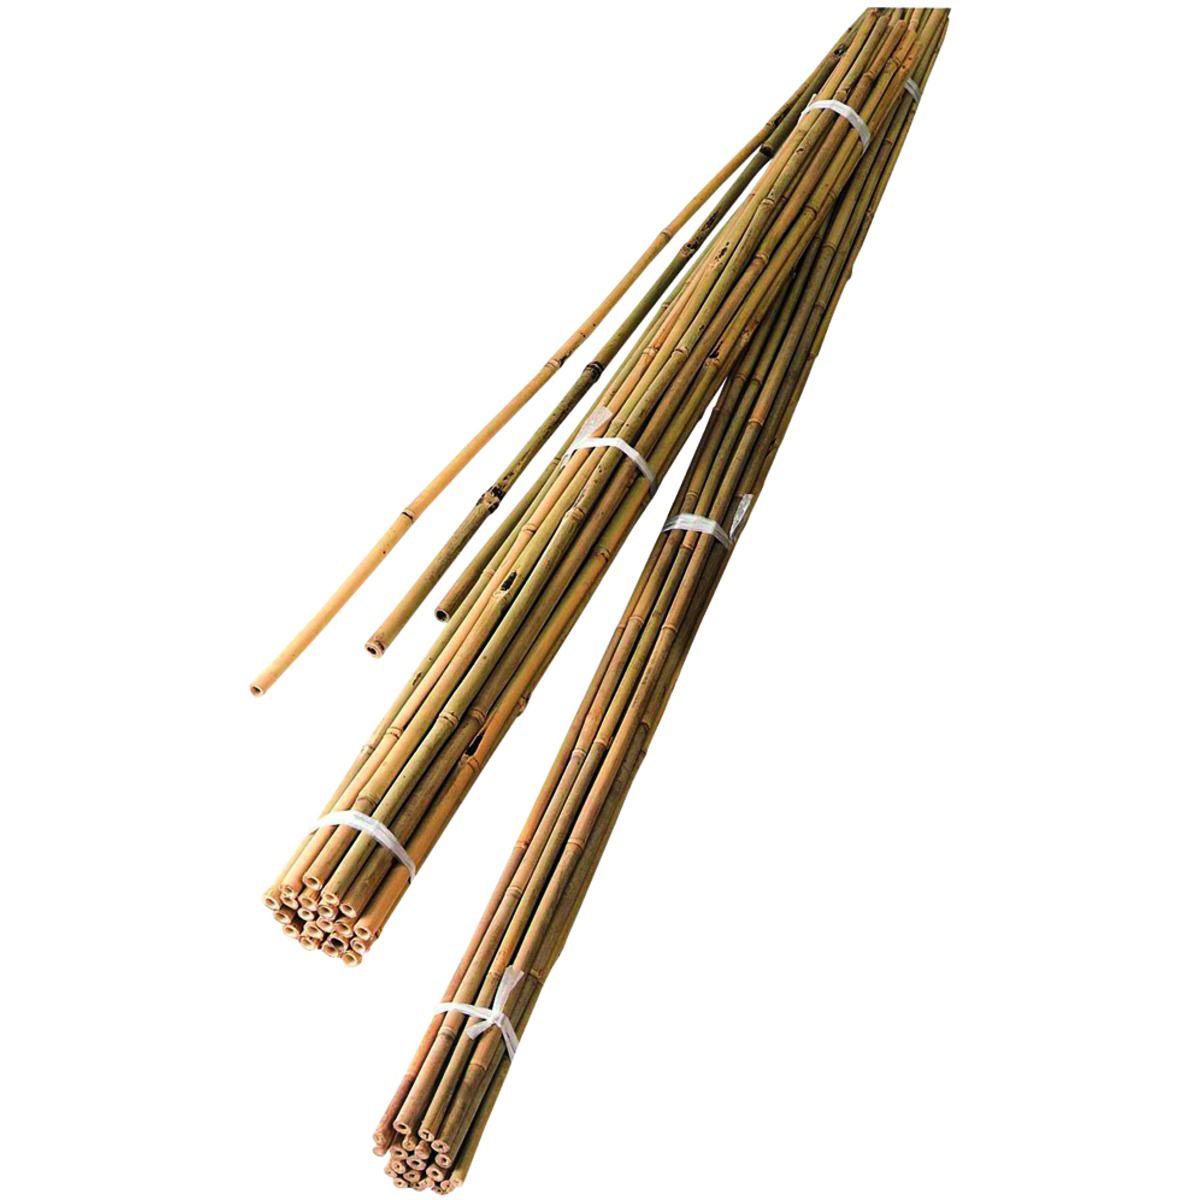 Image of Bamboo Canes 8ft 2.4m PK 10